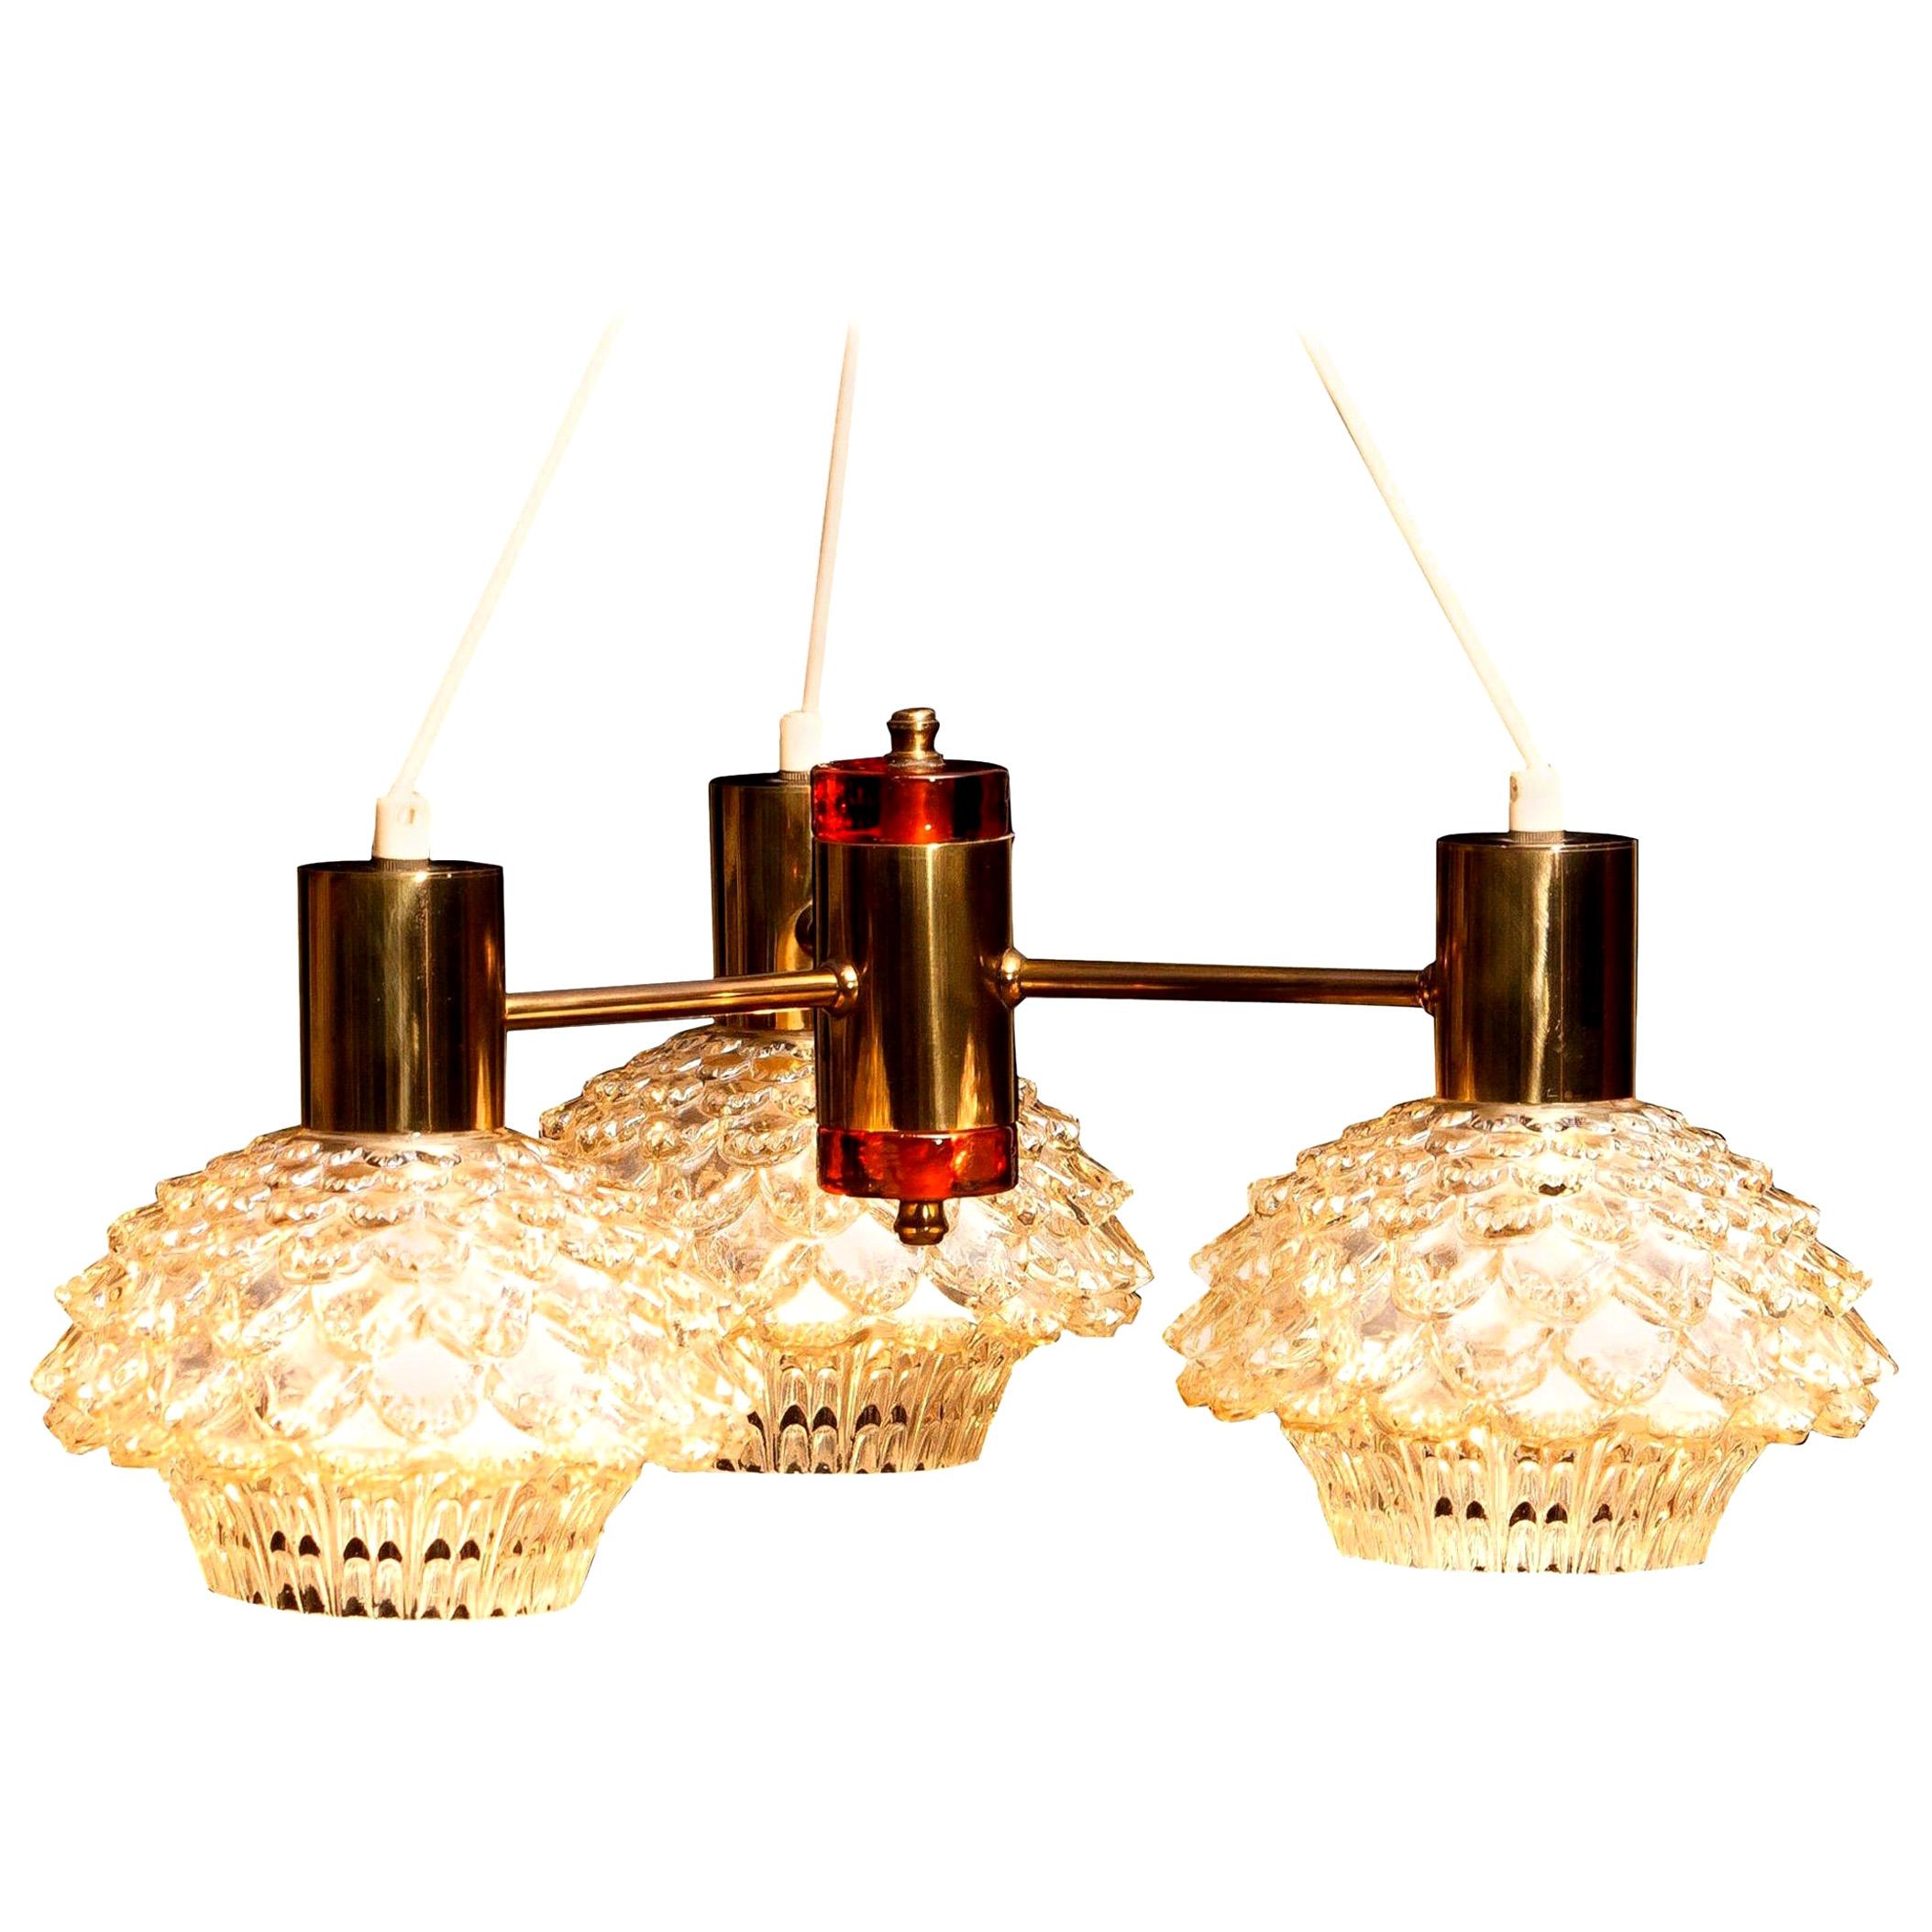 Beautiful chandelier designed by Carl Fagerlund for Orrefors, Sweden.
This lamp has three brass arms with amazing glass shades.
In the middle a brass cylinder with on the top and bottom an amber glass element.
It is in a very nice